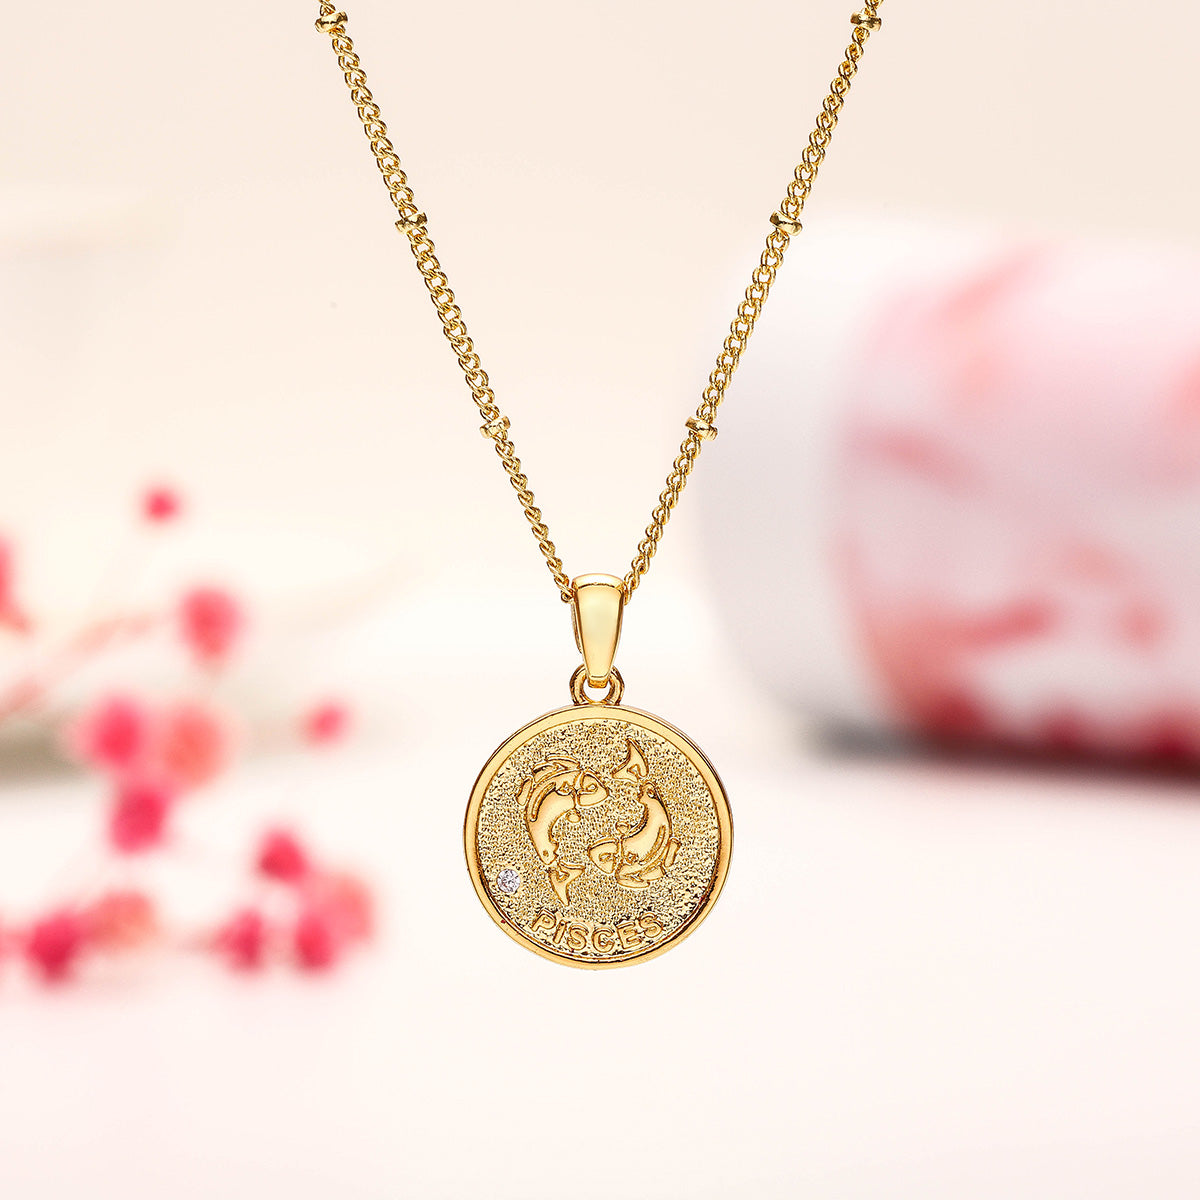 Pisces Constellation Coin Pendant Astrology Necklace